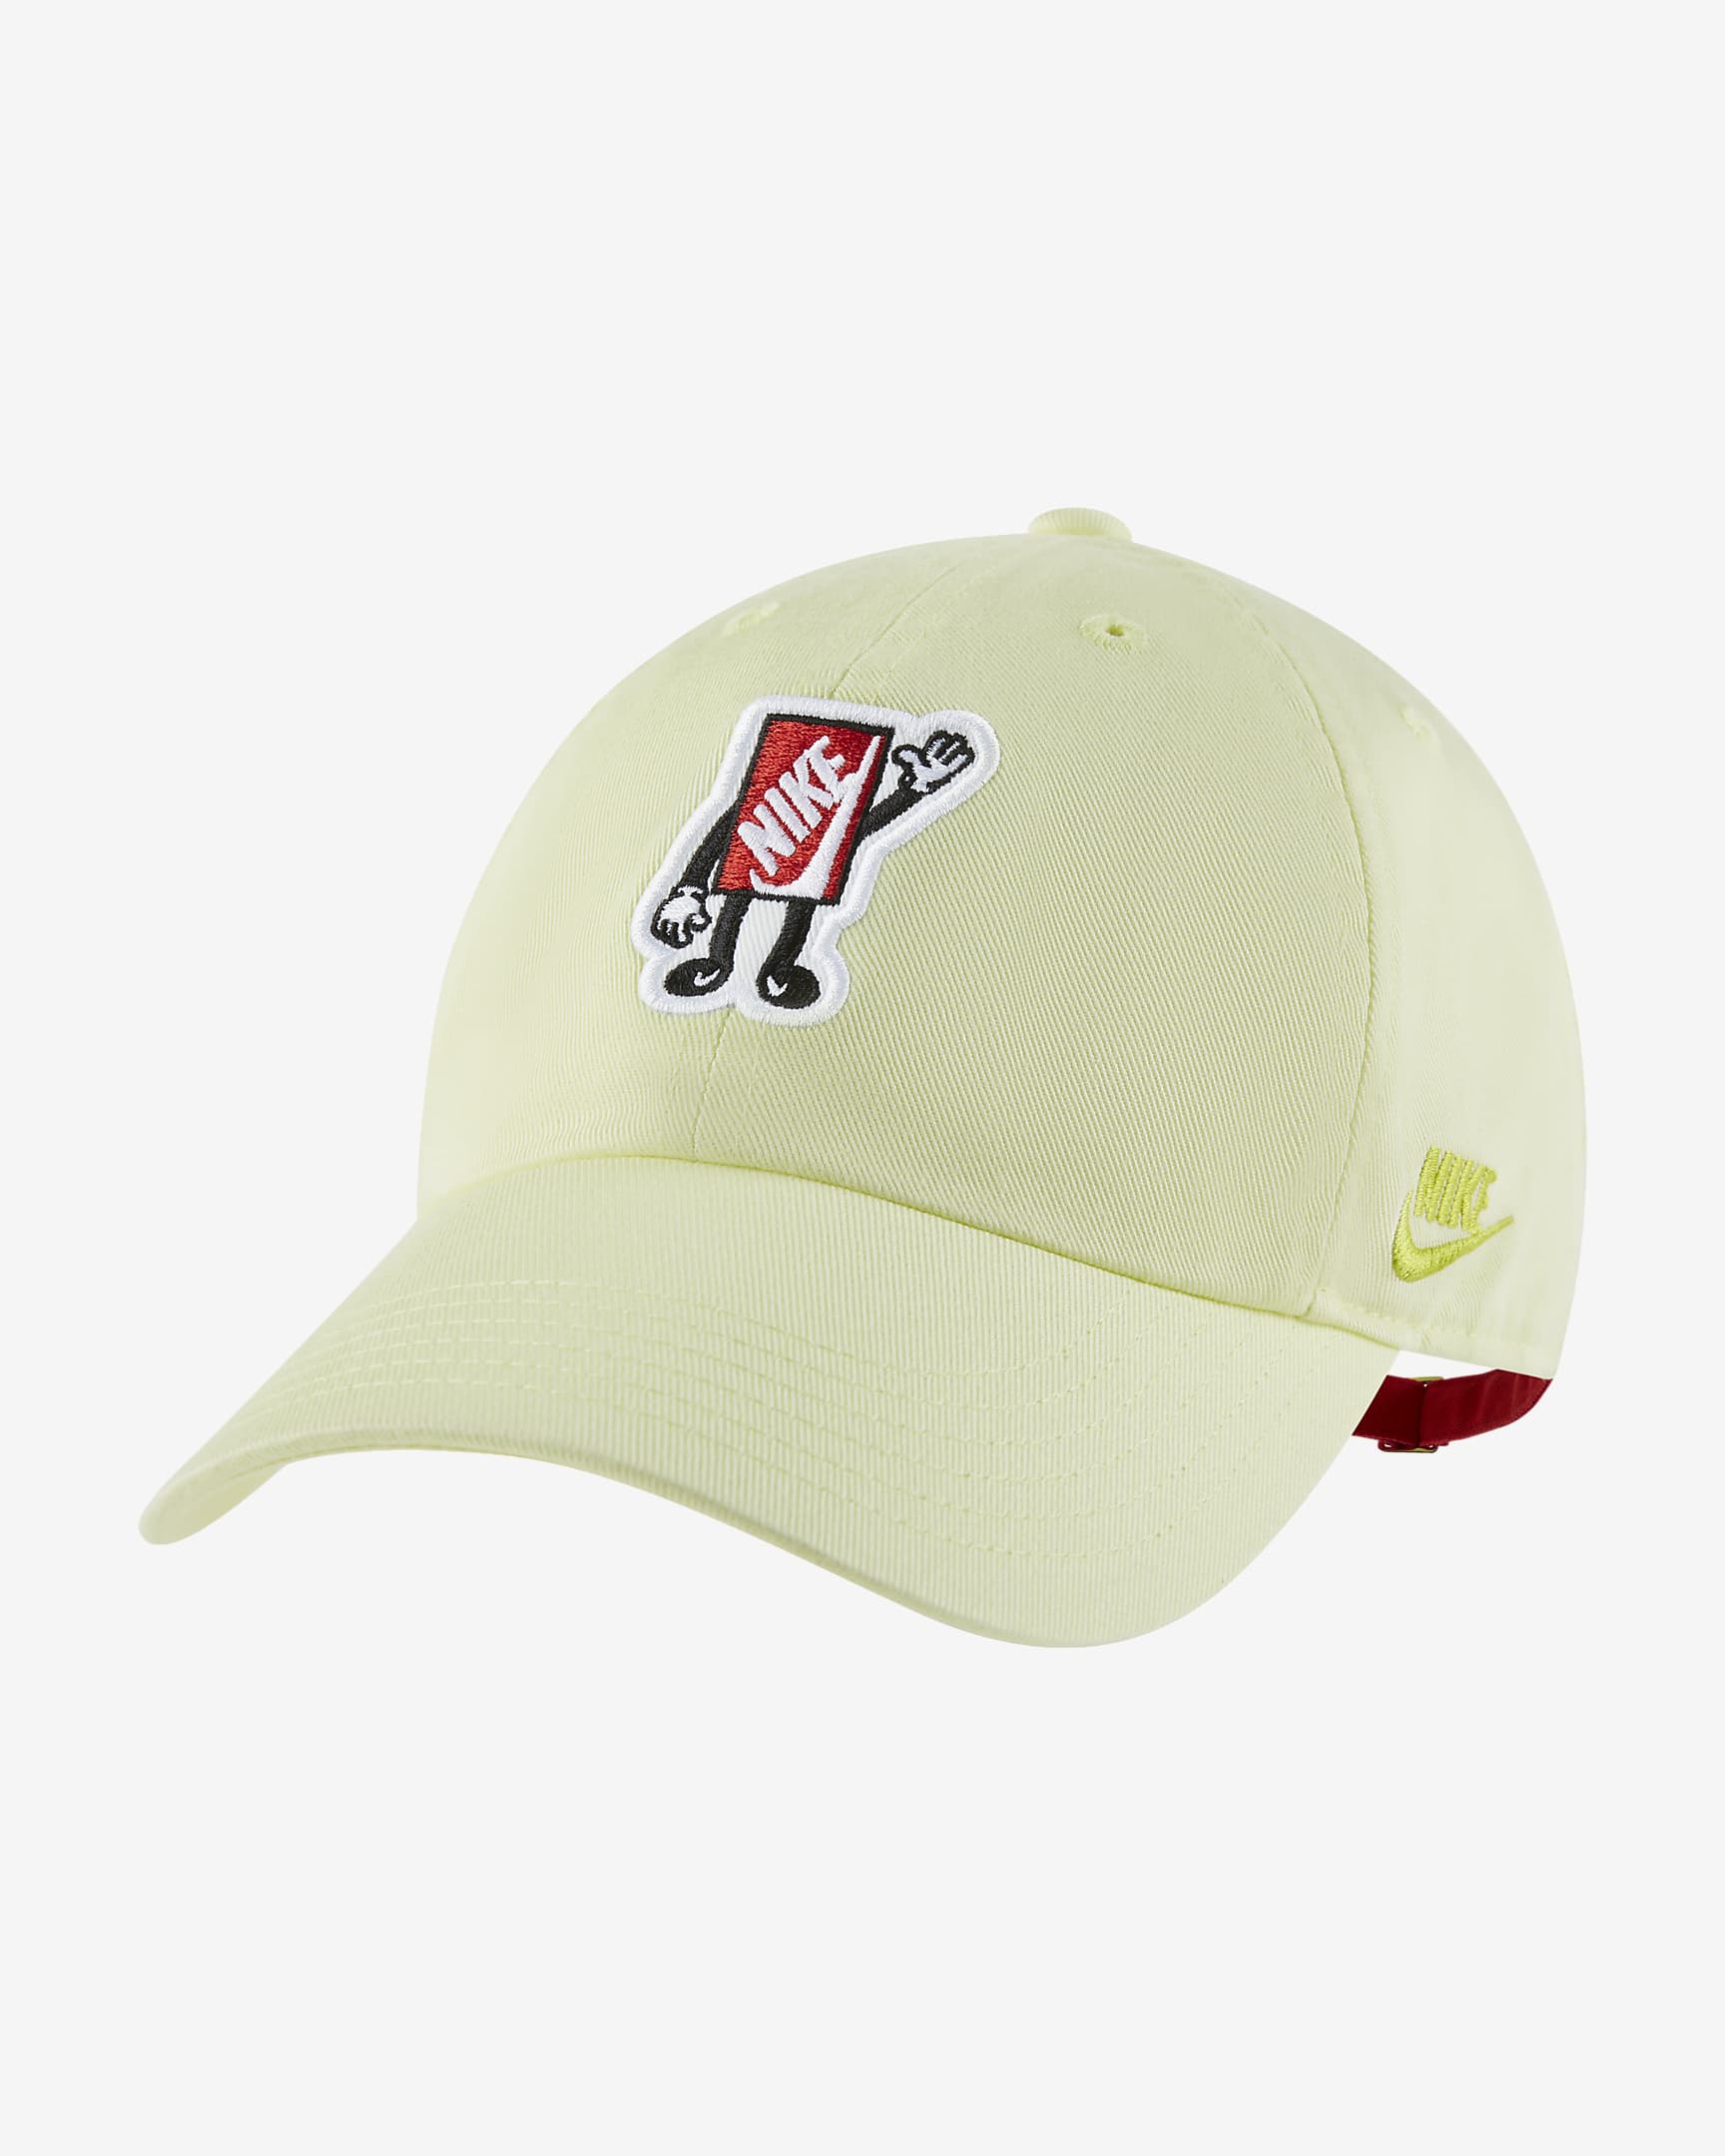 Nike Club Kids' Adjustable Unstructured Boxy Cap. Nike VN